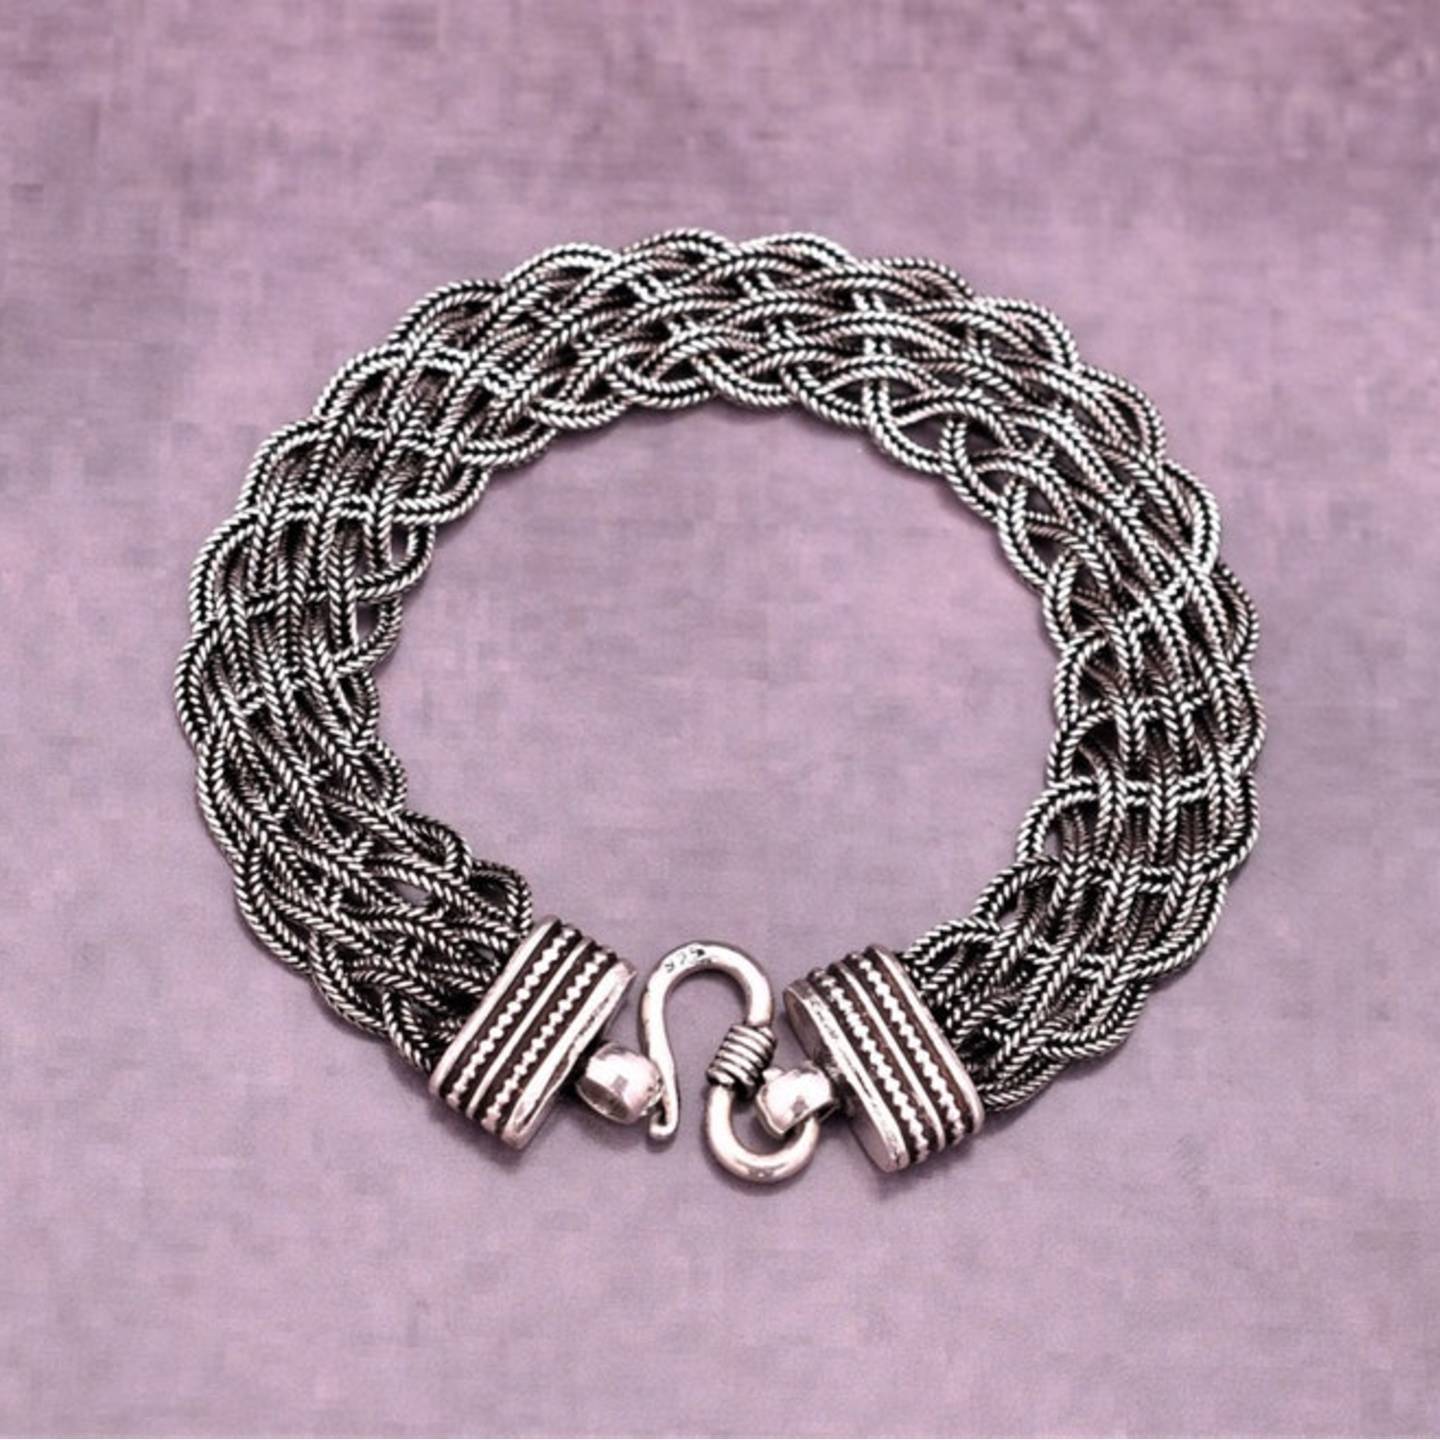 Solid 925 Sterling Silver Bracelet - Length 8.25 Inches - 29gm